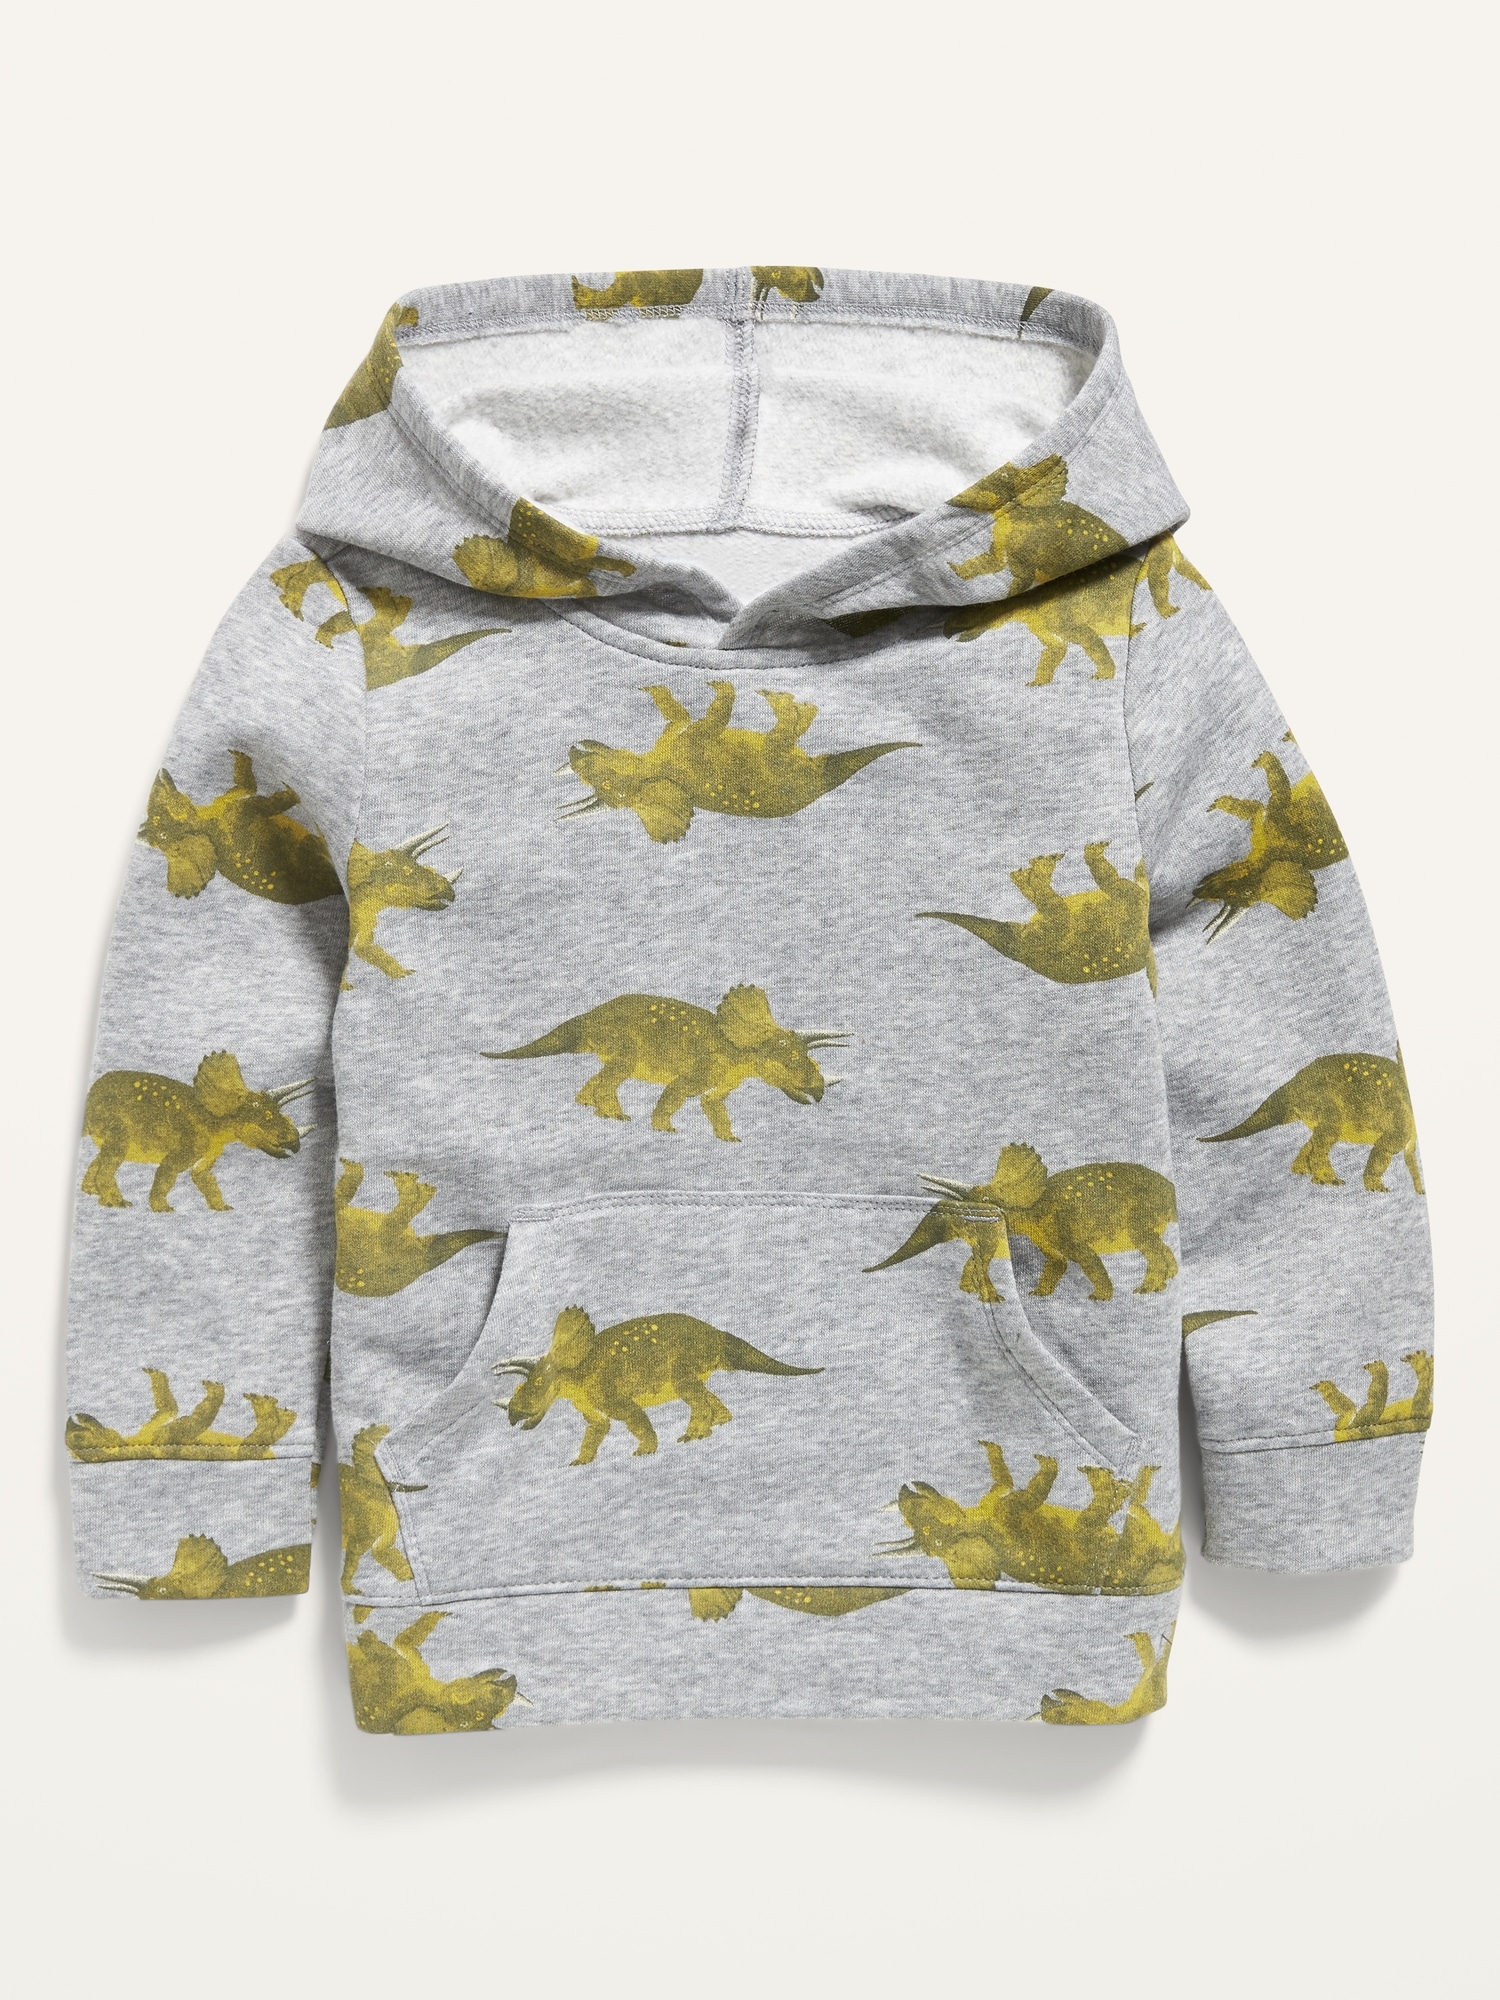 Unisex Dino-Print Pullover Hoodie for Toddler | Old Navy